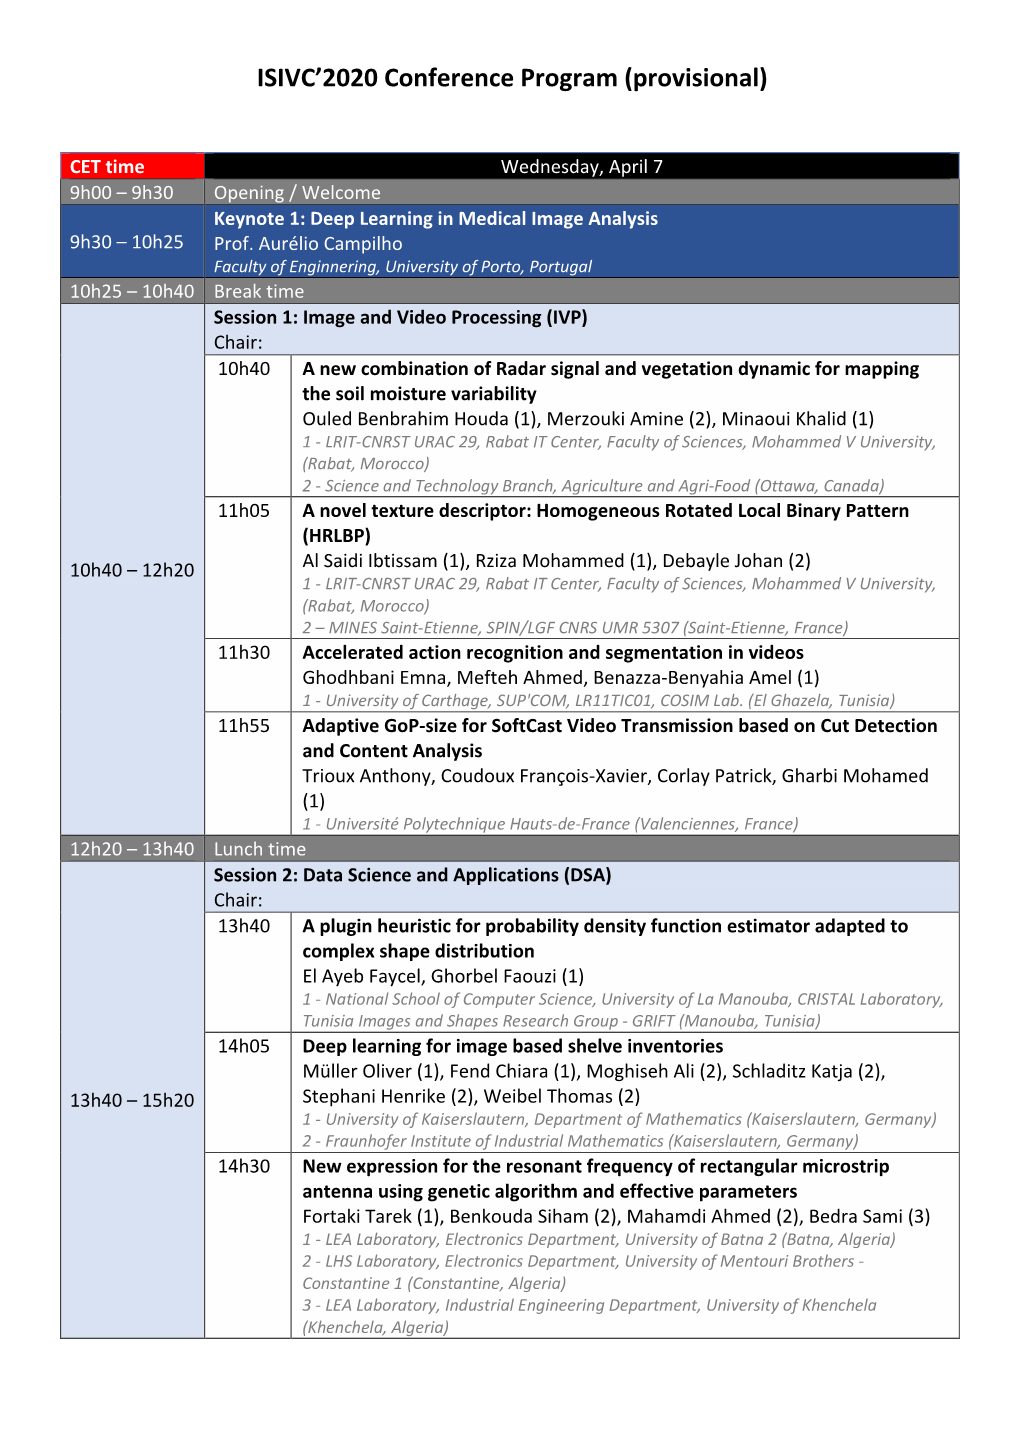 ISIVC'2020 Conference Program (Provisional)